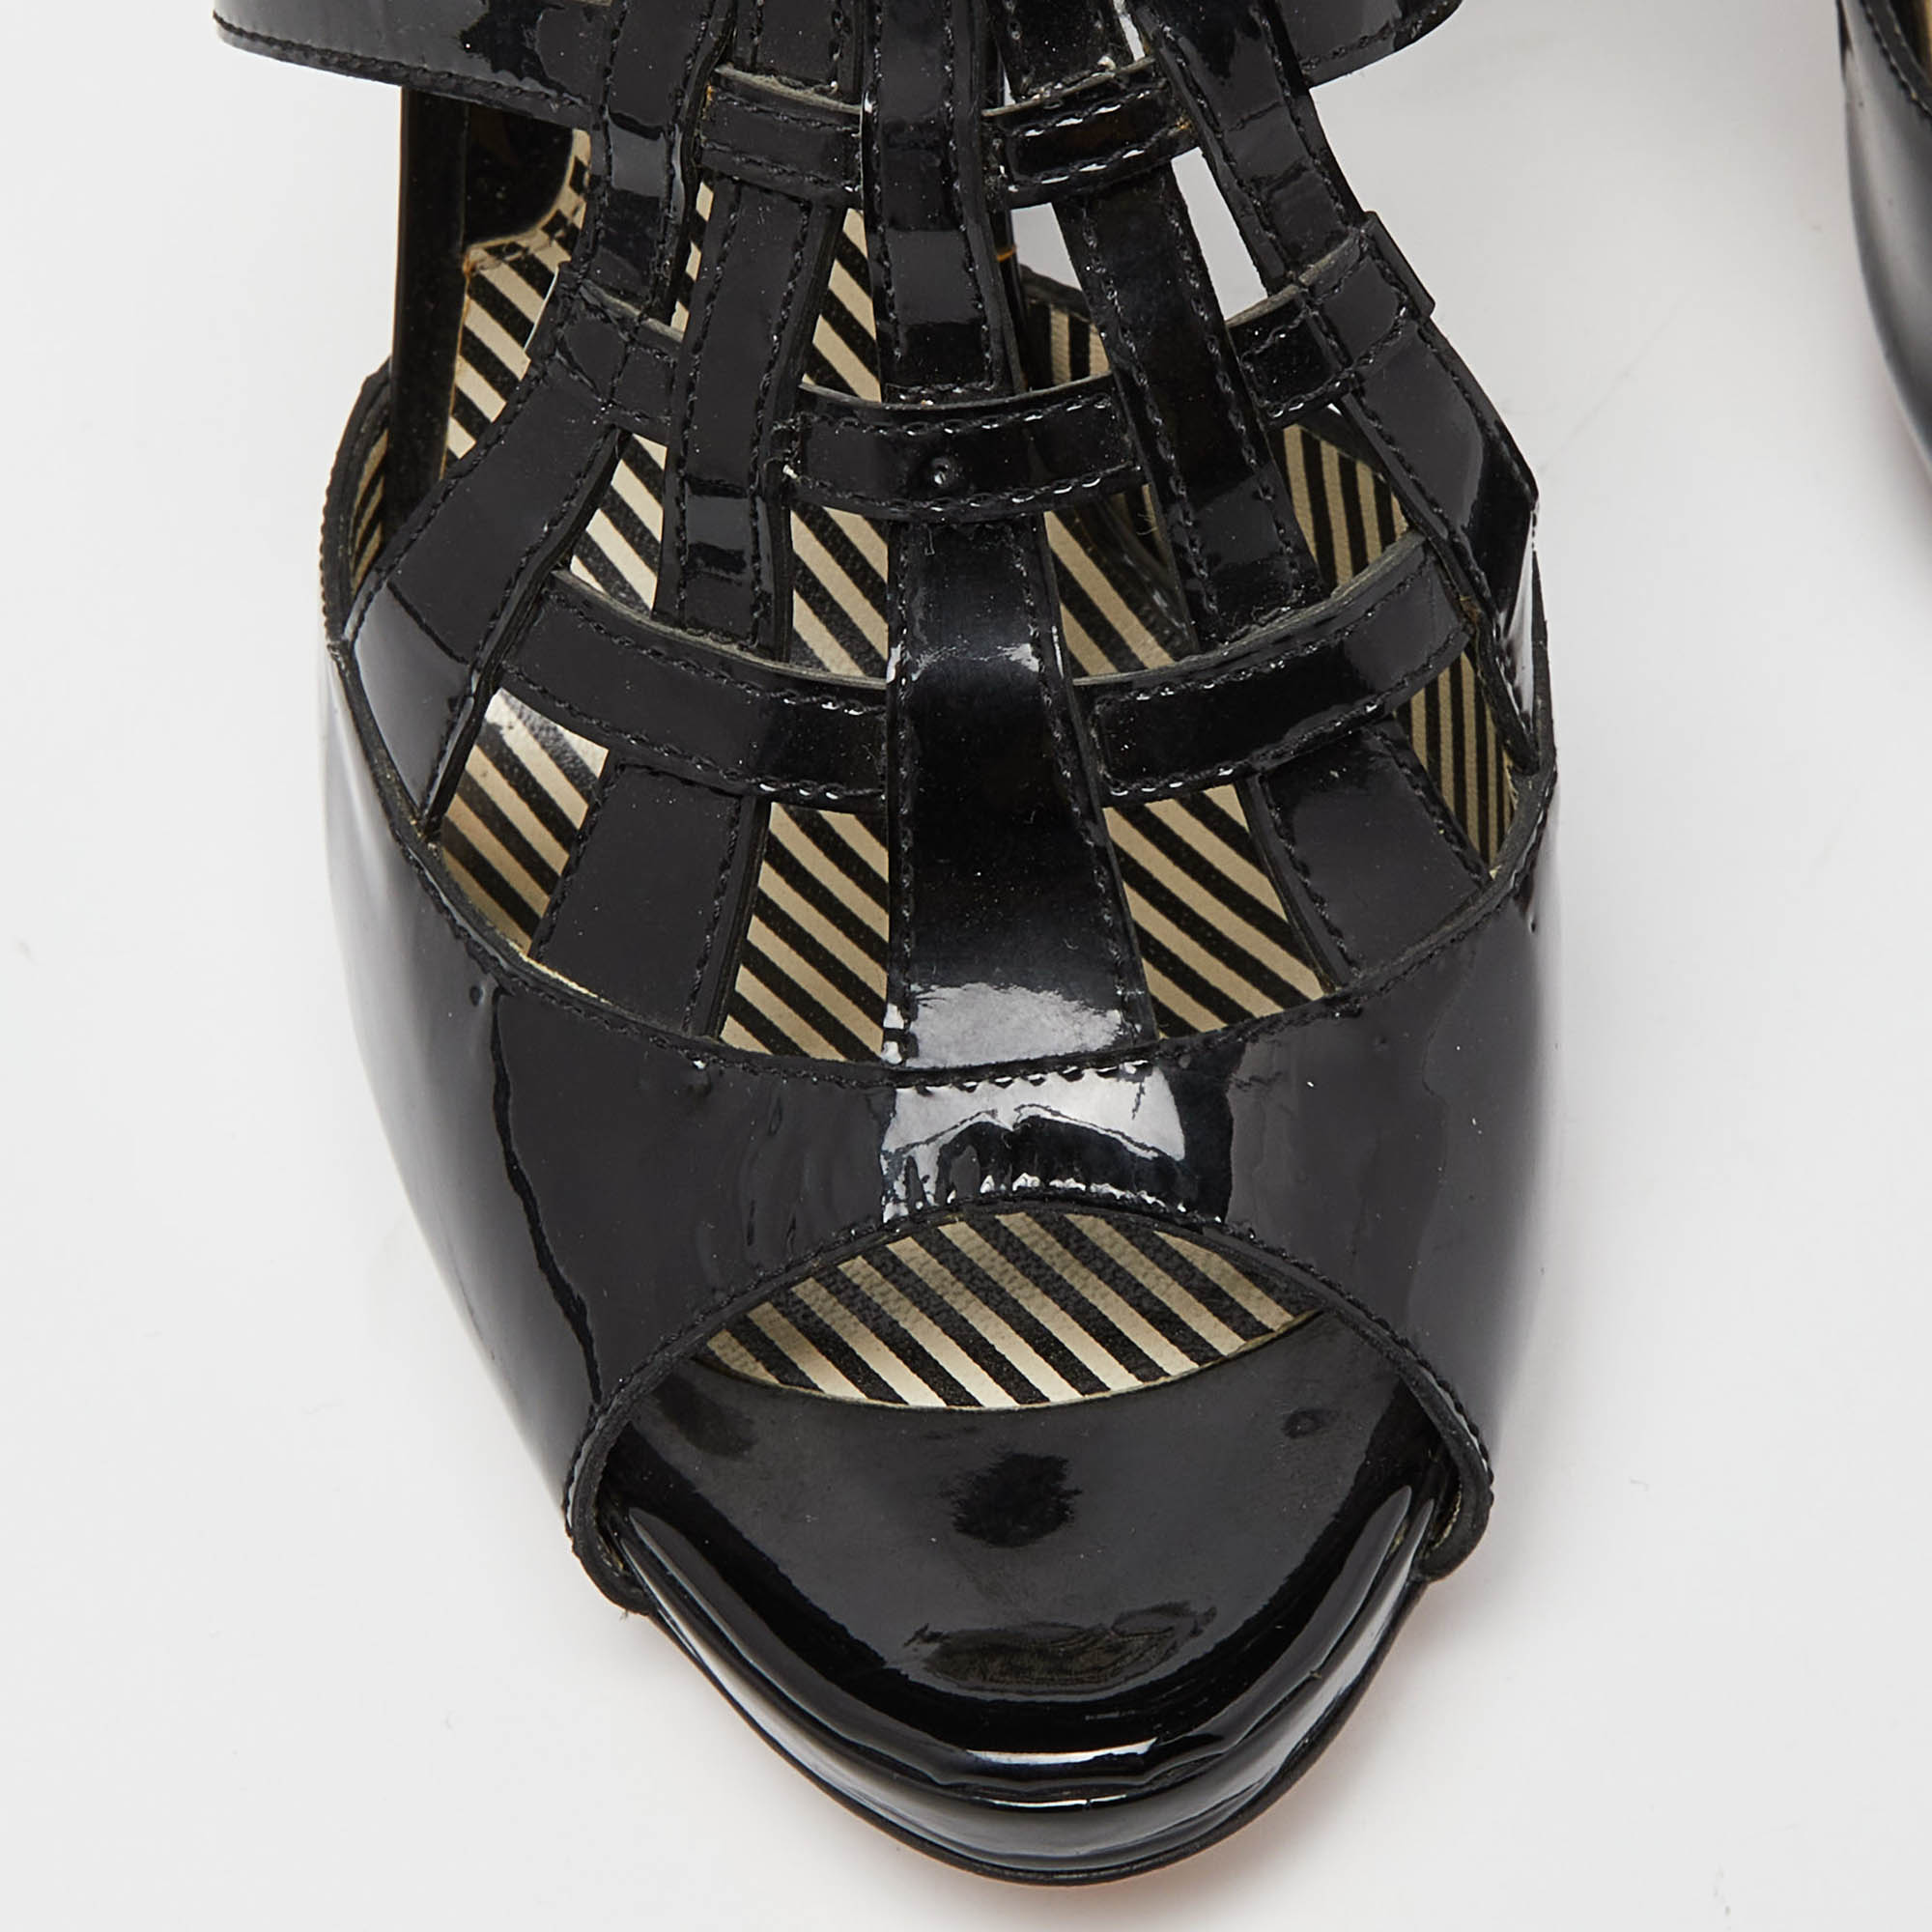 Moschino Black Patent Leather Caged Slingback Sandals Size 38